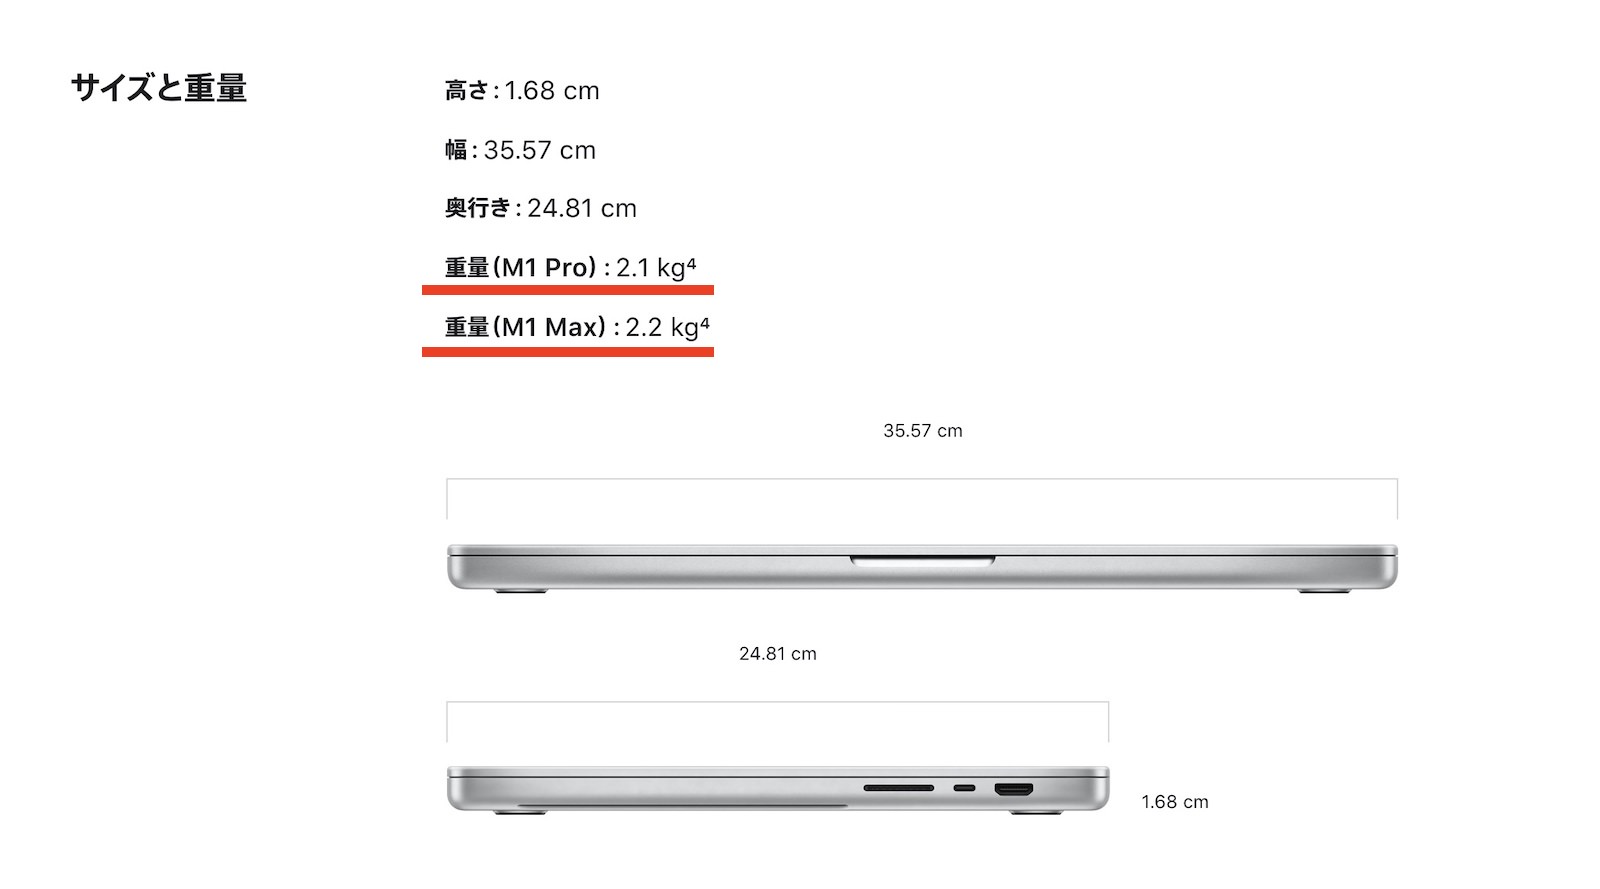 16inch mbp weight